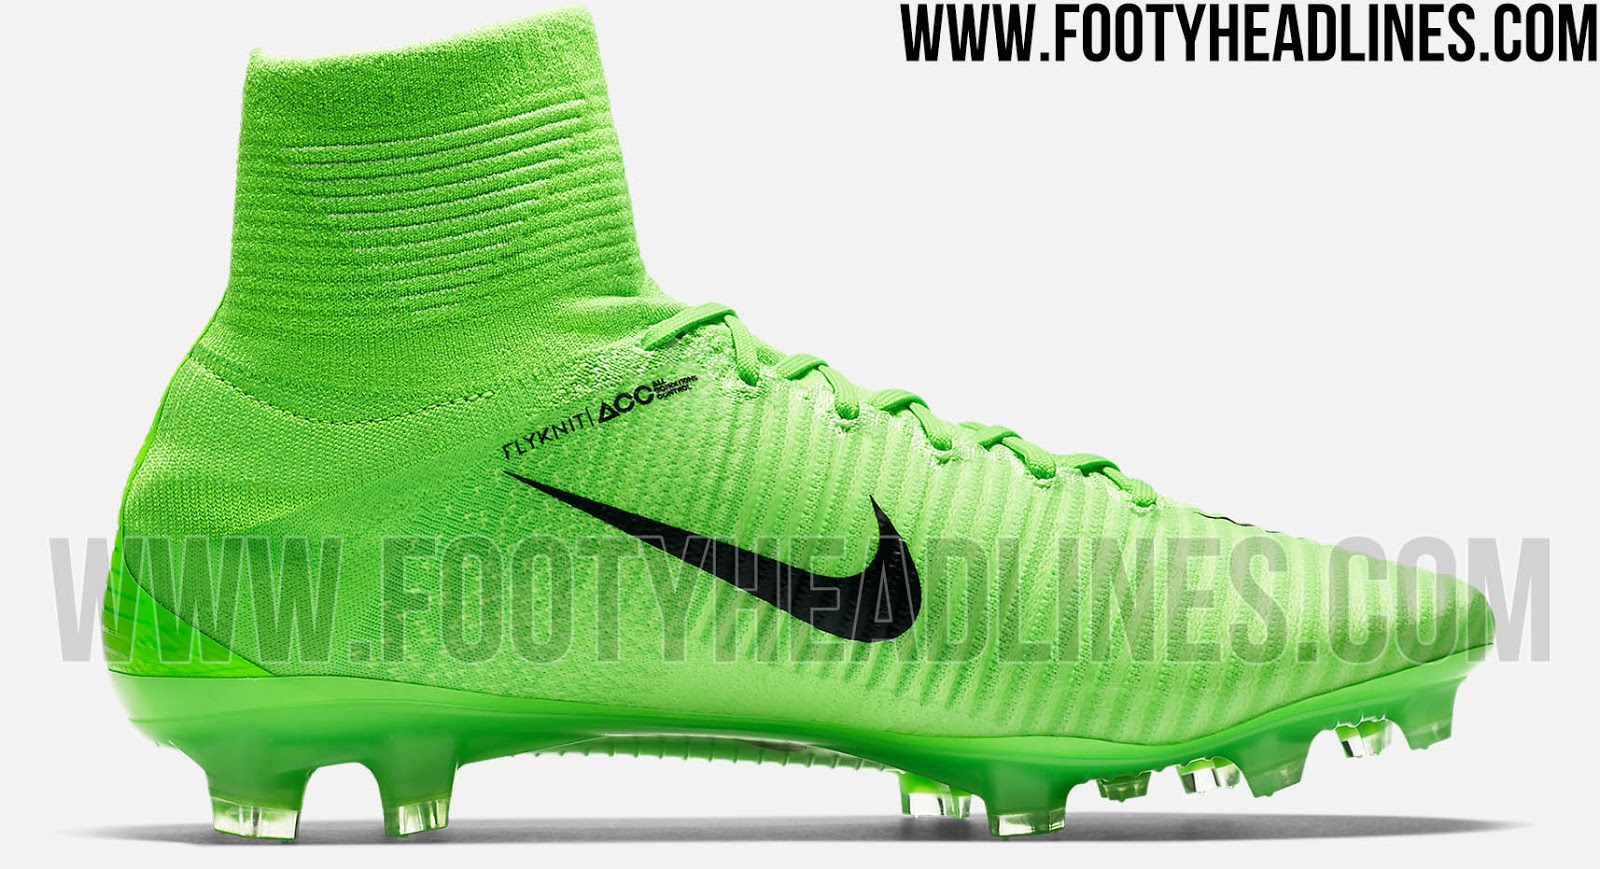 Updated Design: Electric Nike Mercurial Superfly V Radiation Flare 2017 Boots Revealed - Footy Headlines